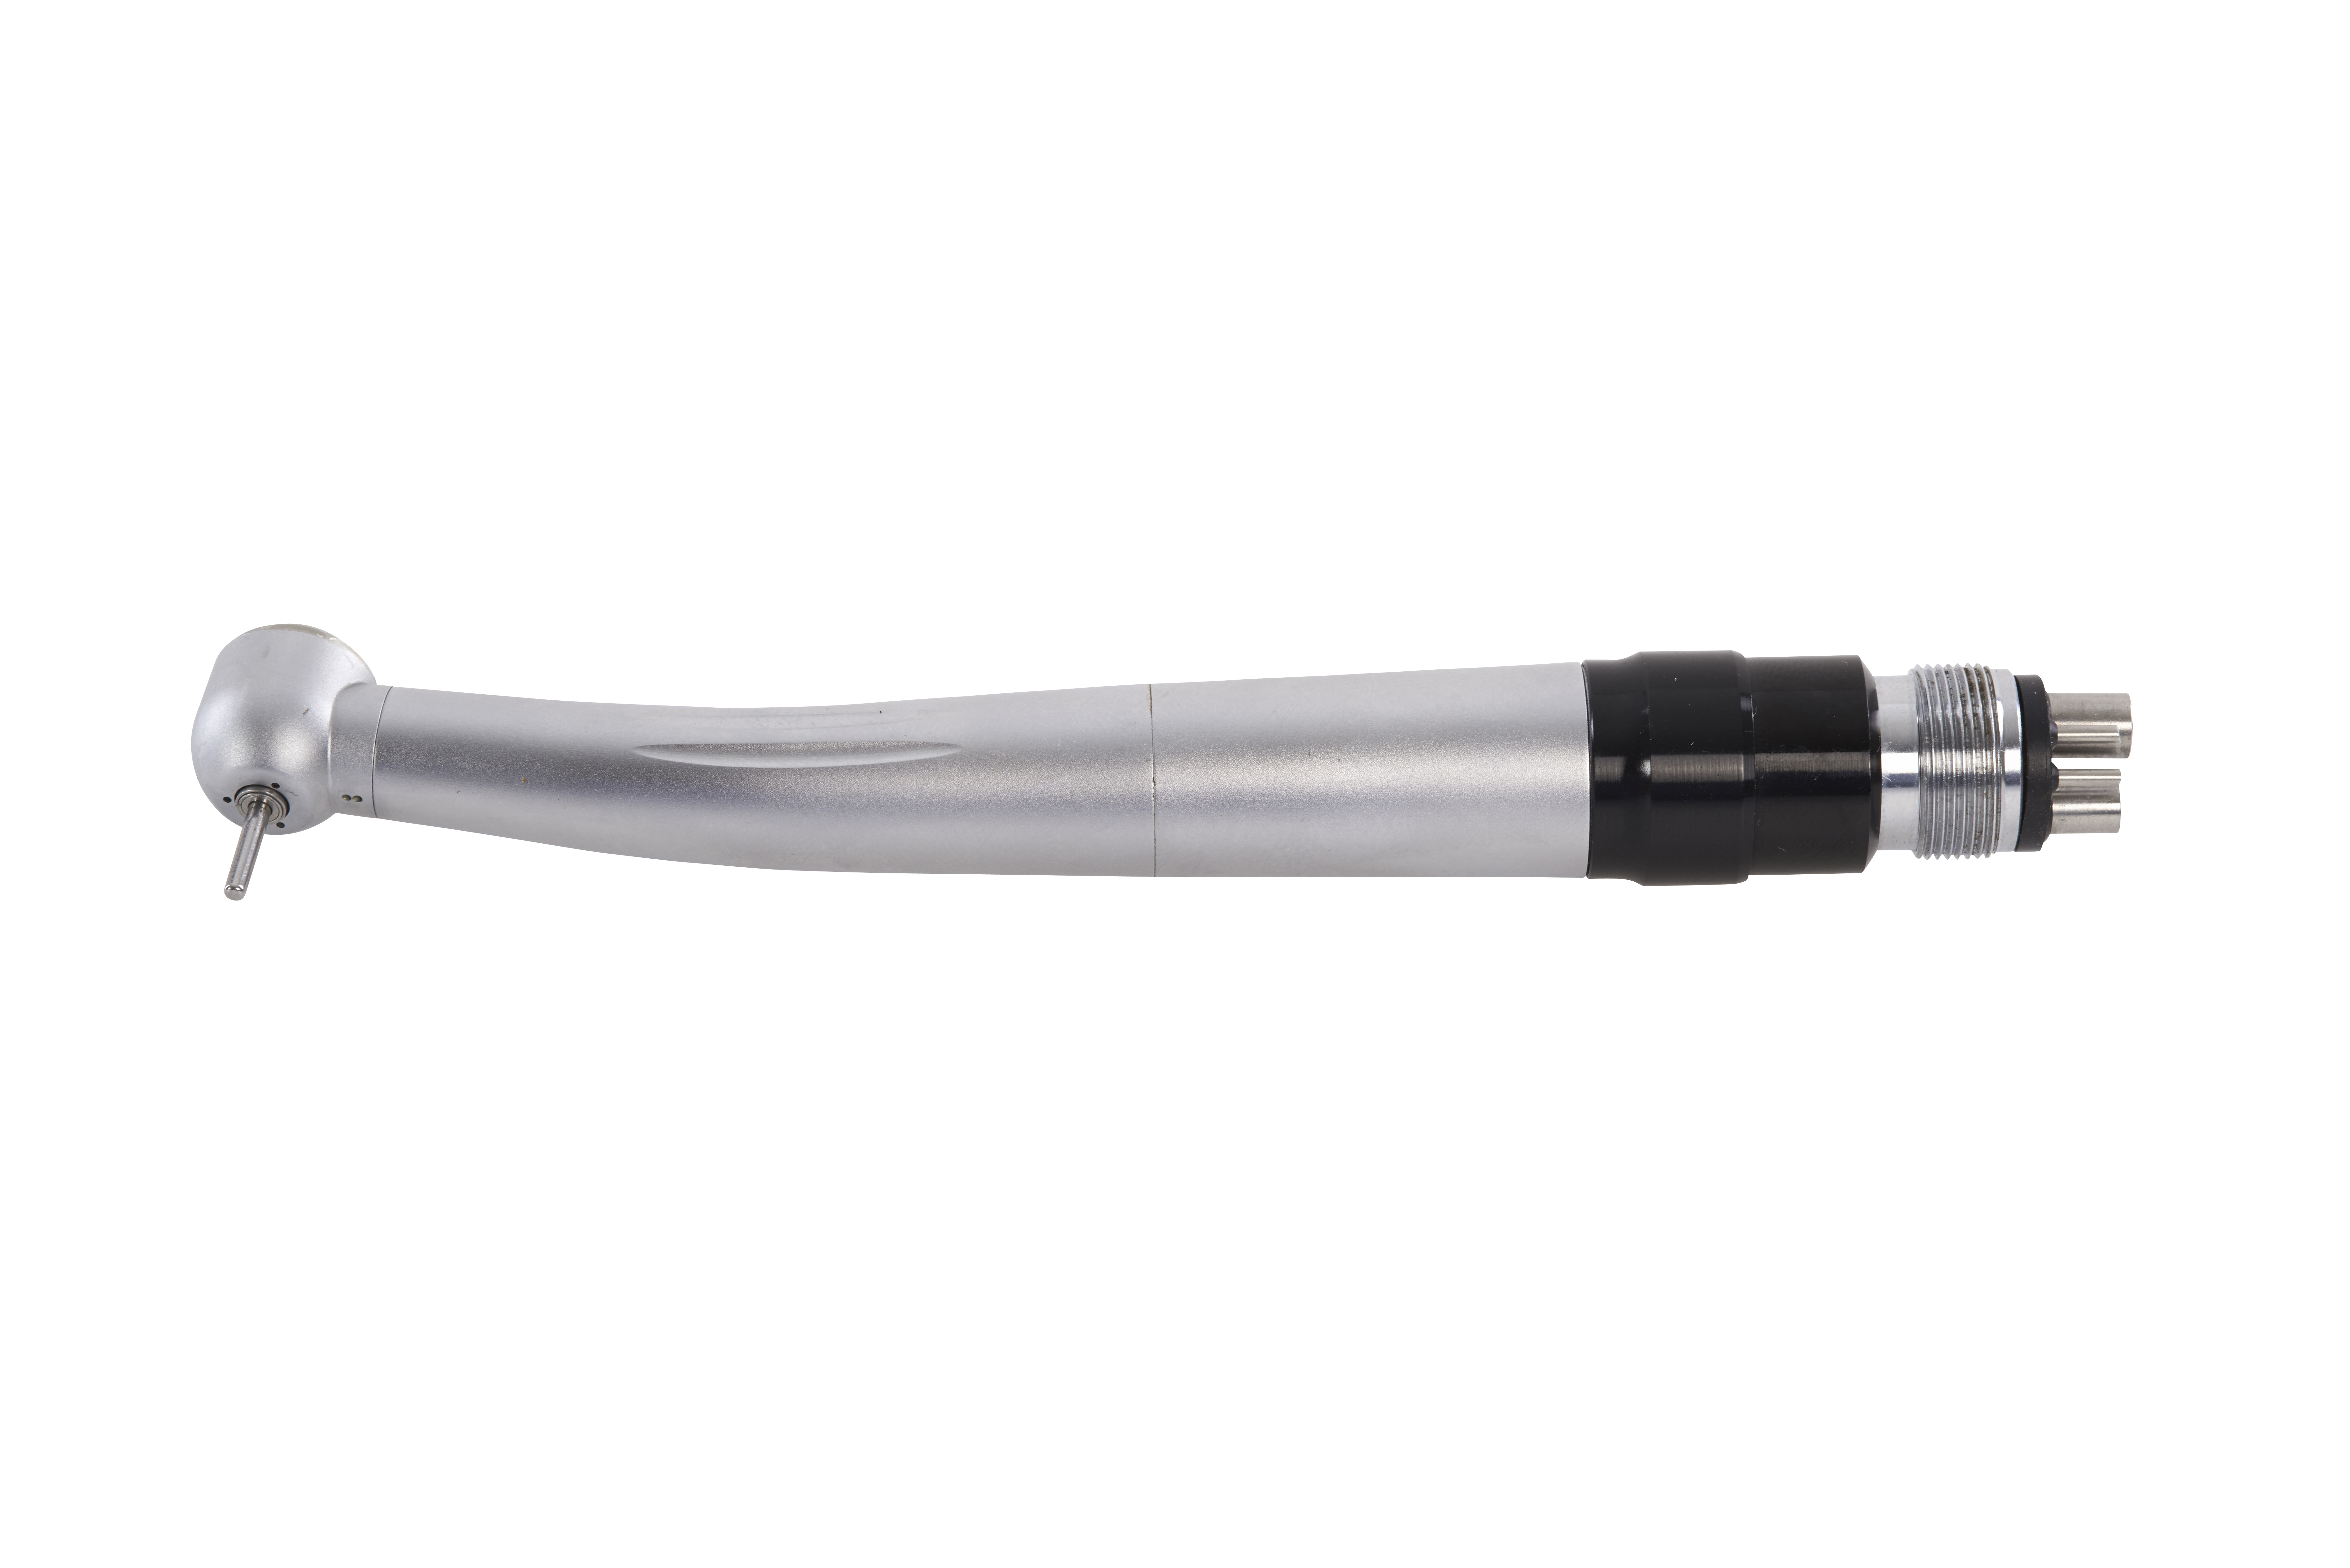 NSK Pana-Max 2 High-Speed Handpiece, non optic